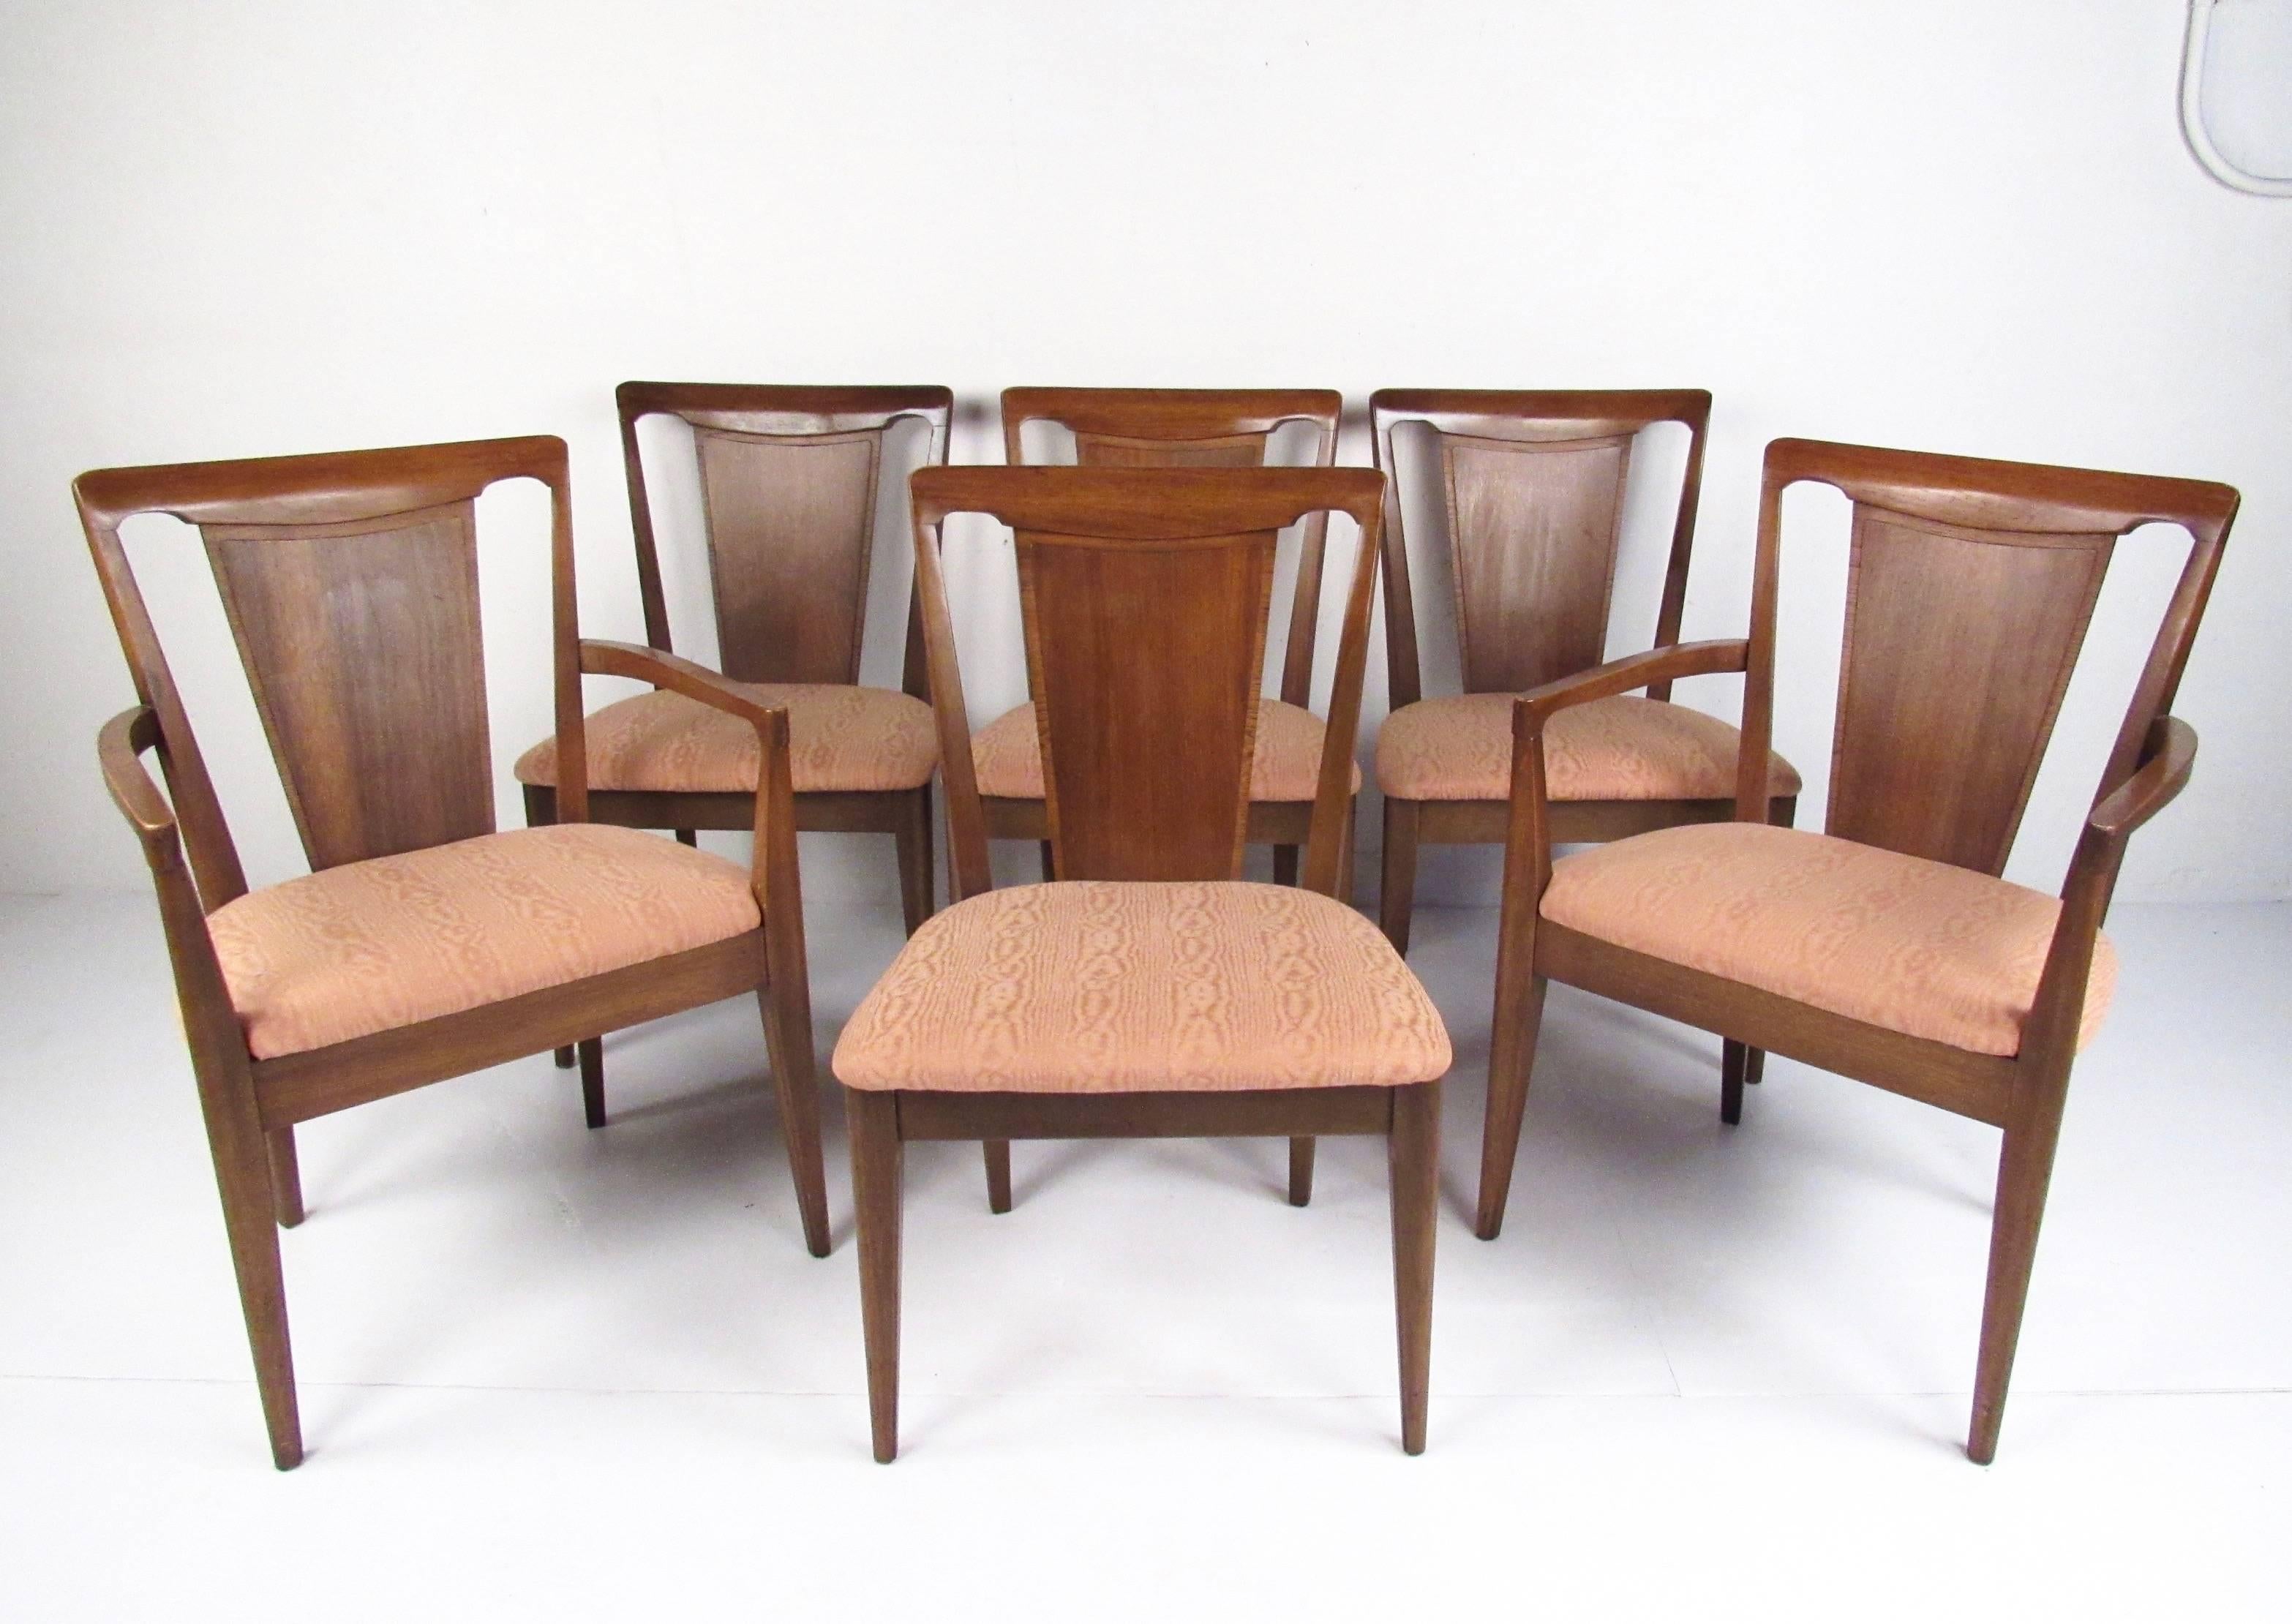 This stylish set of six matching dining chairs features heavy midcentury pecan construction, unique modern shape, and vintage seat covering. Ideal set of modern hardwood dining chairs for luxury home dining room. Please confirm item location (NY or